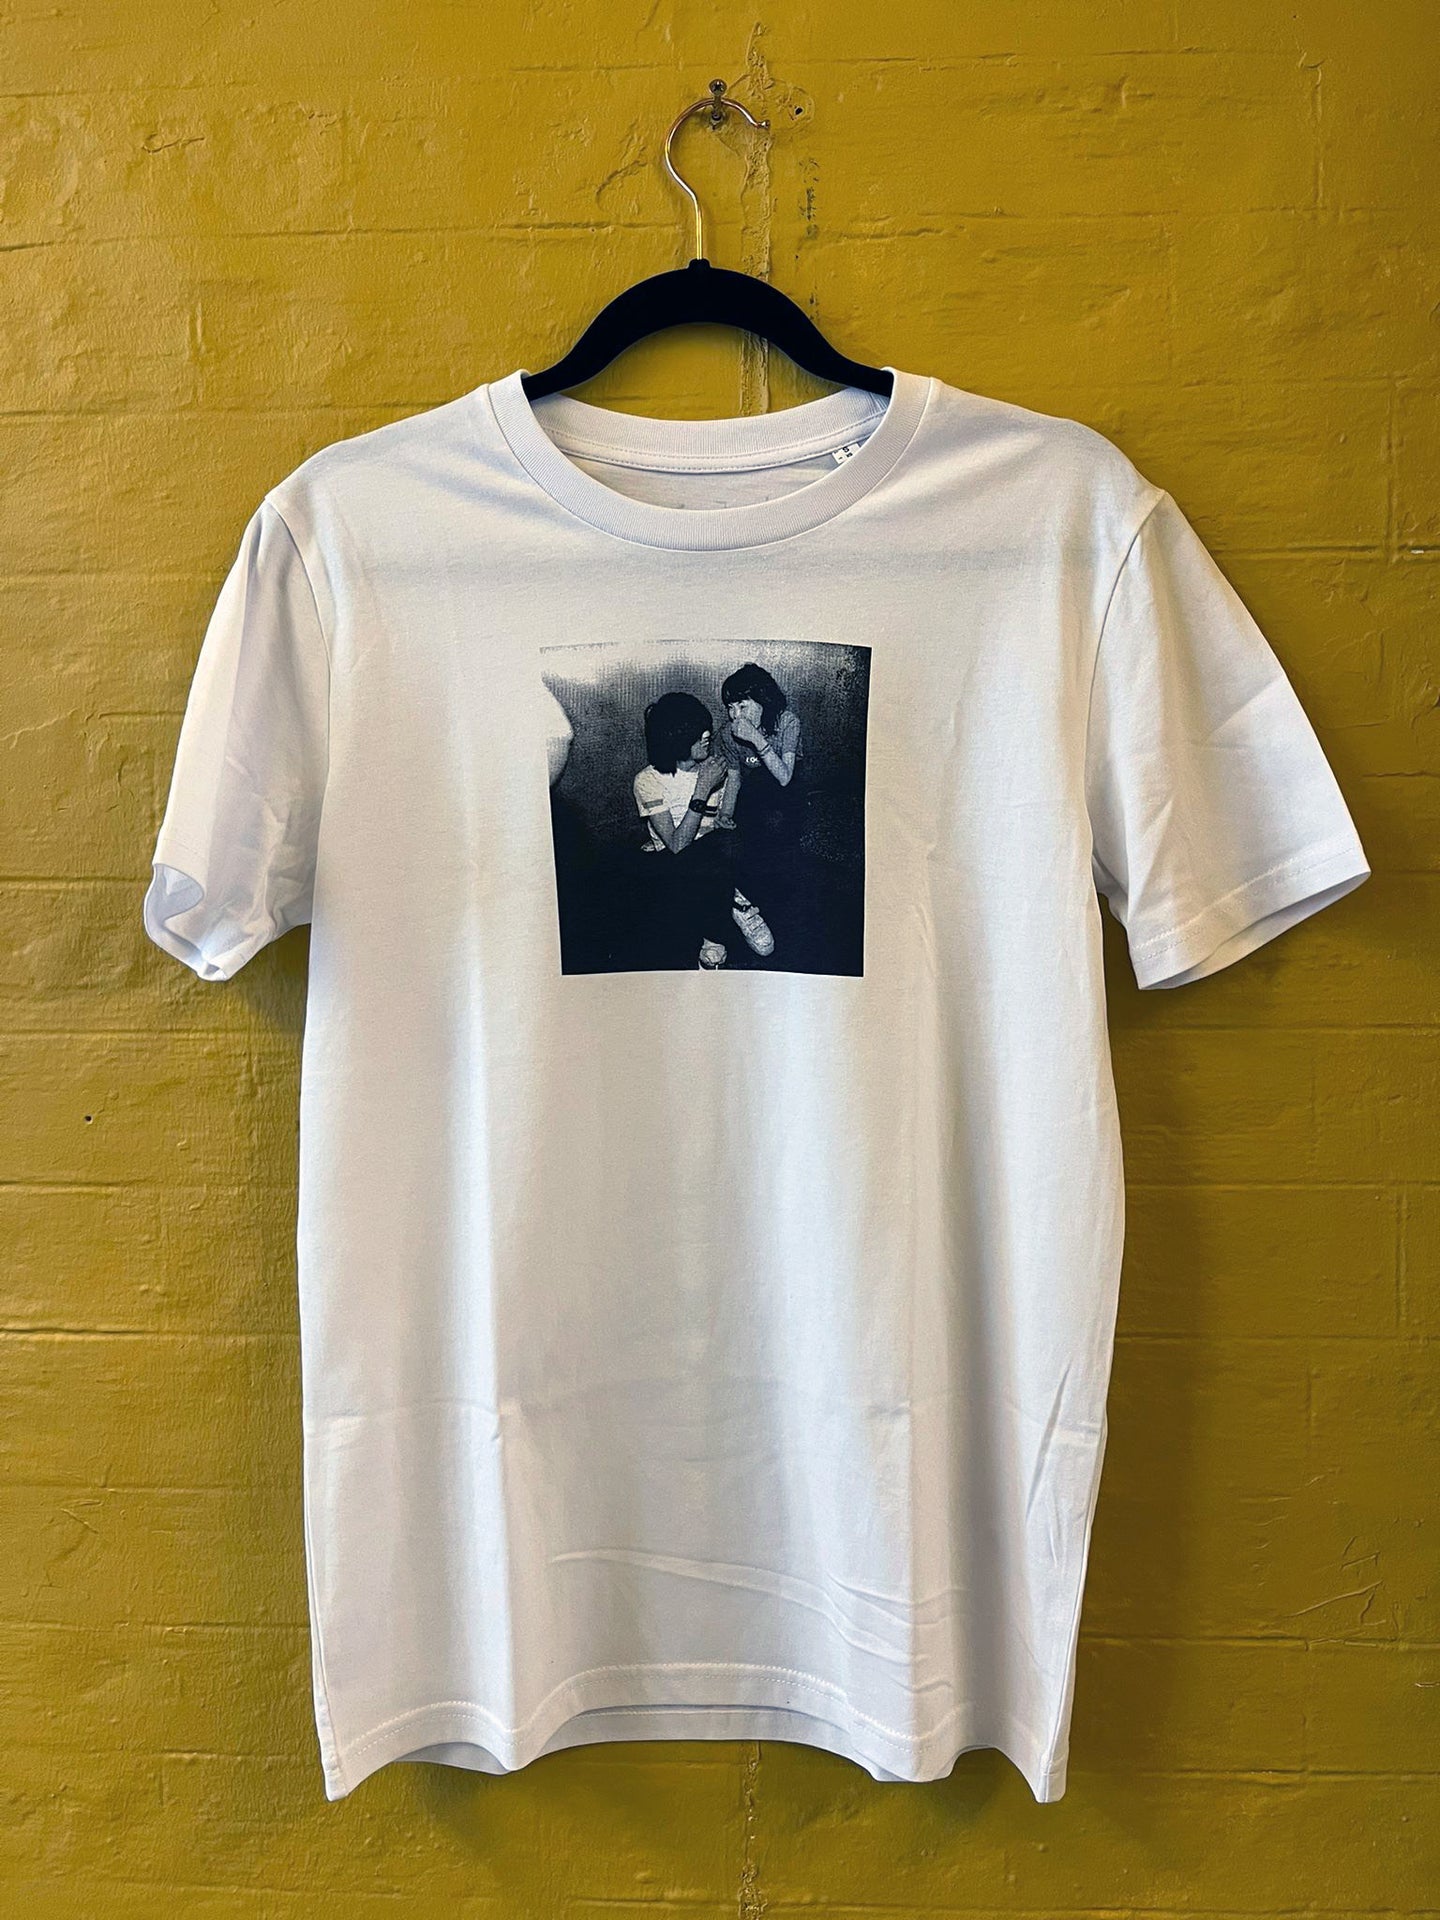 Ewen Spencer 'Upstairs at Sonic Mook' T-shirt Edition